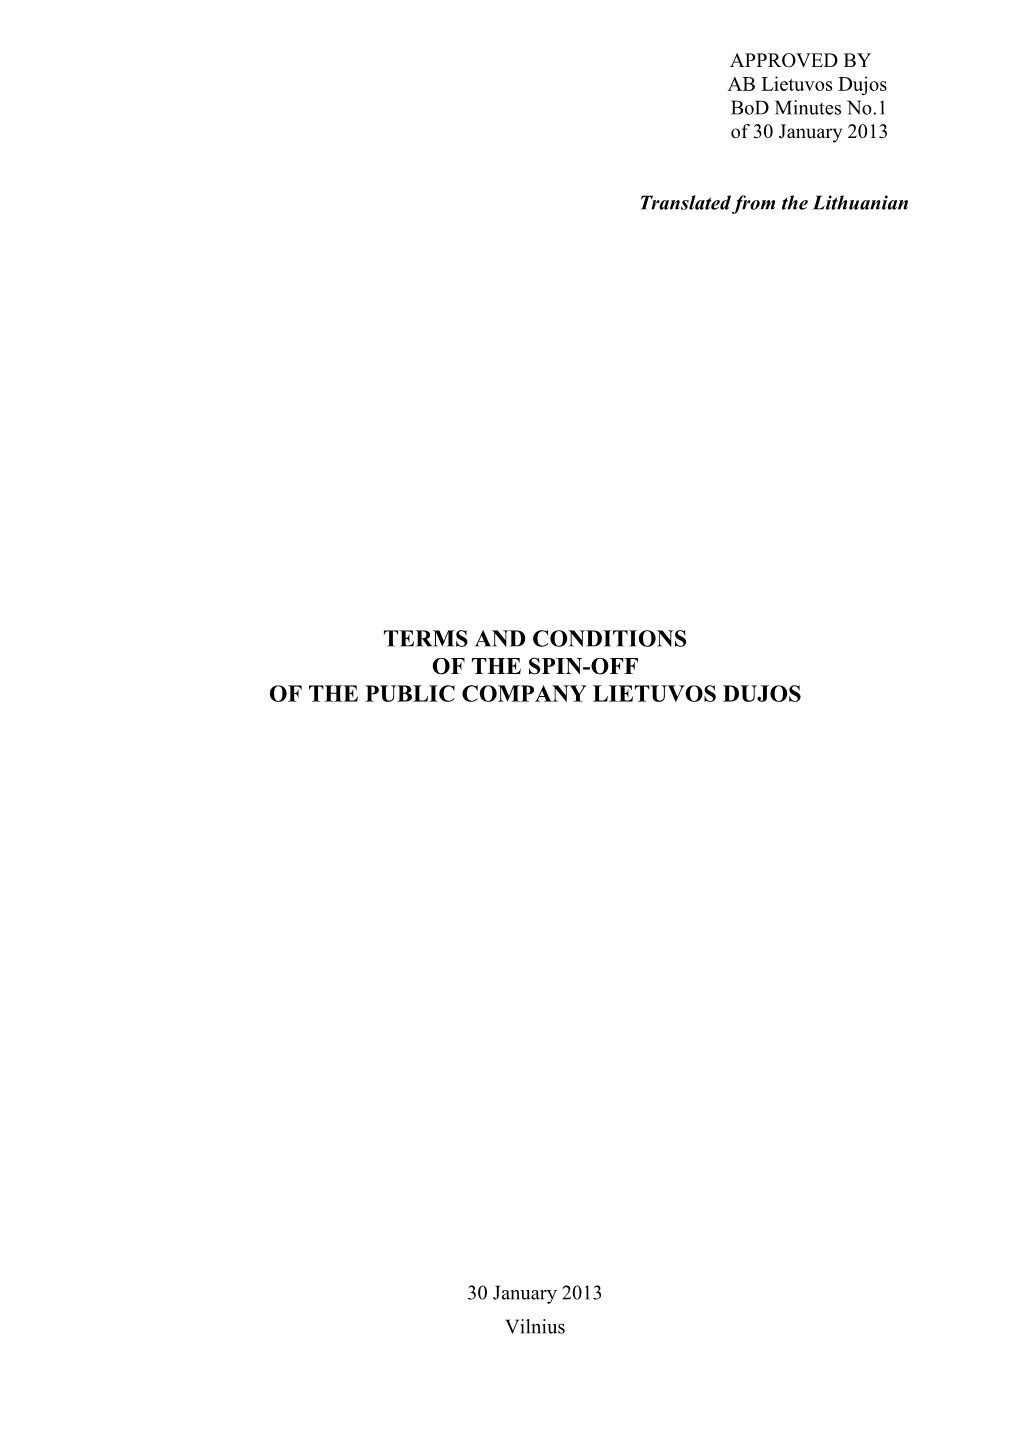 Terms and Conditions of the Spin-Off of the Public Company Lietuvos Dujos